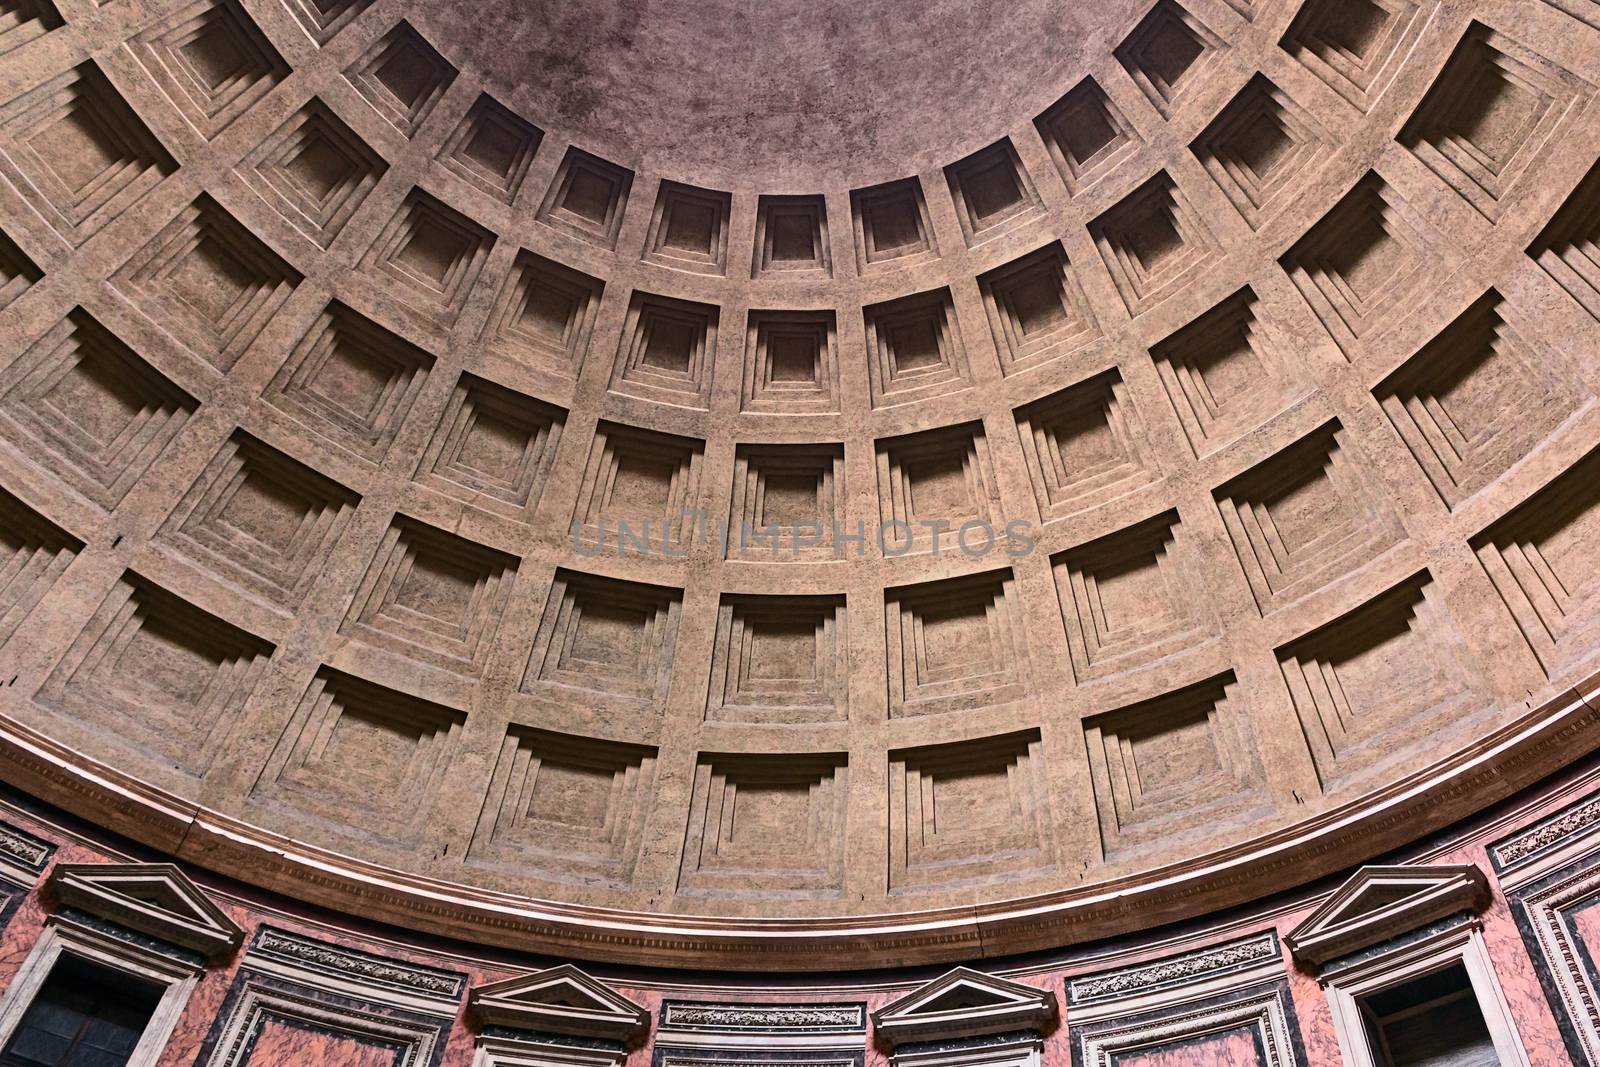 Image of dome of the pantheon photographed from inside